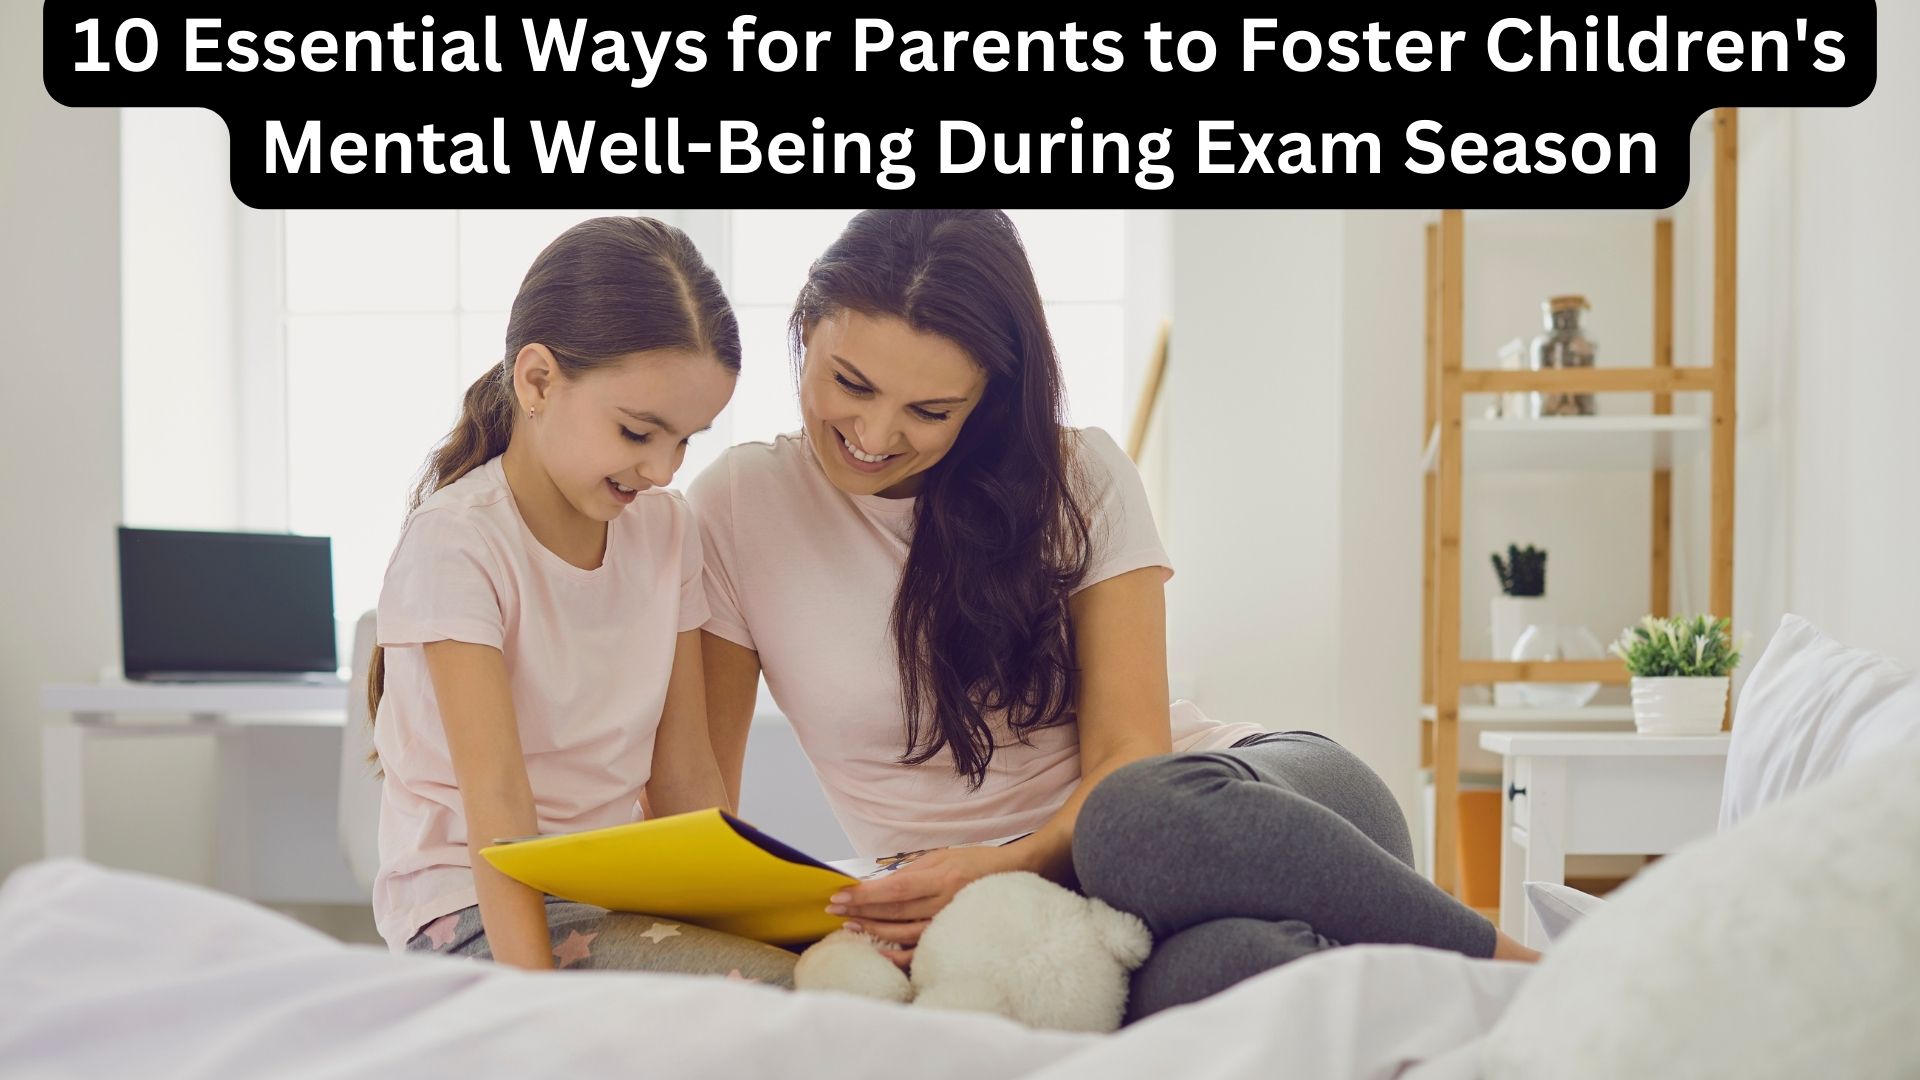 10 Essential Ways for Parents to Foster Children's Mental Well-Being During Exam Season